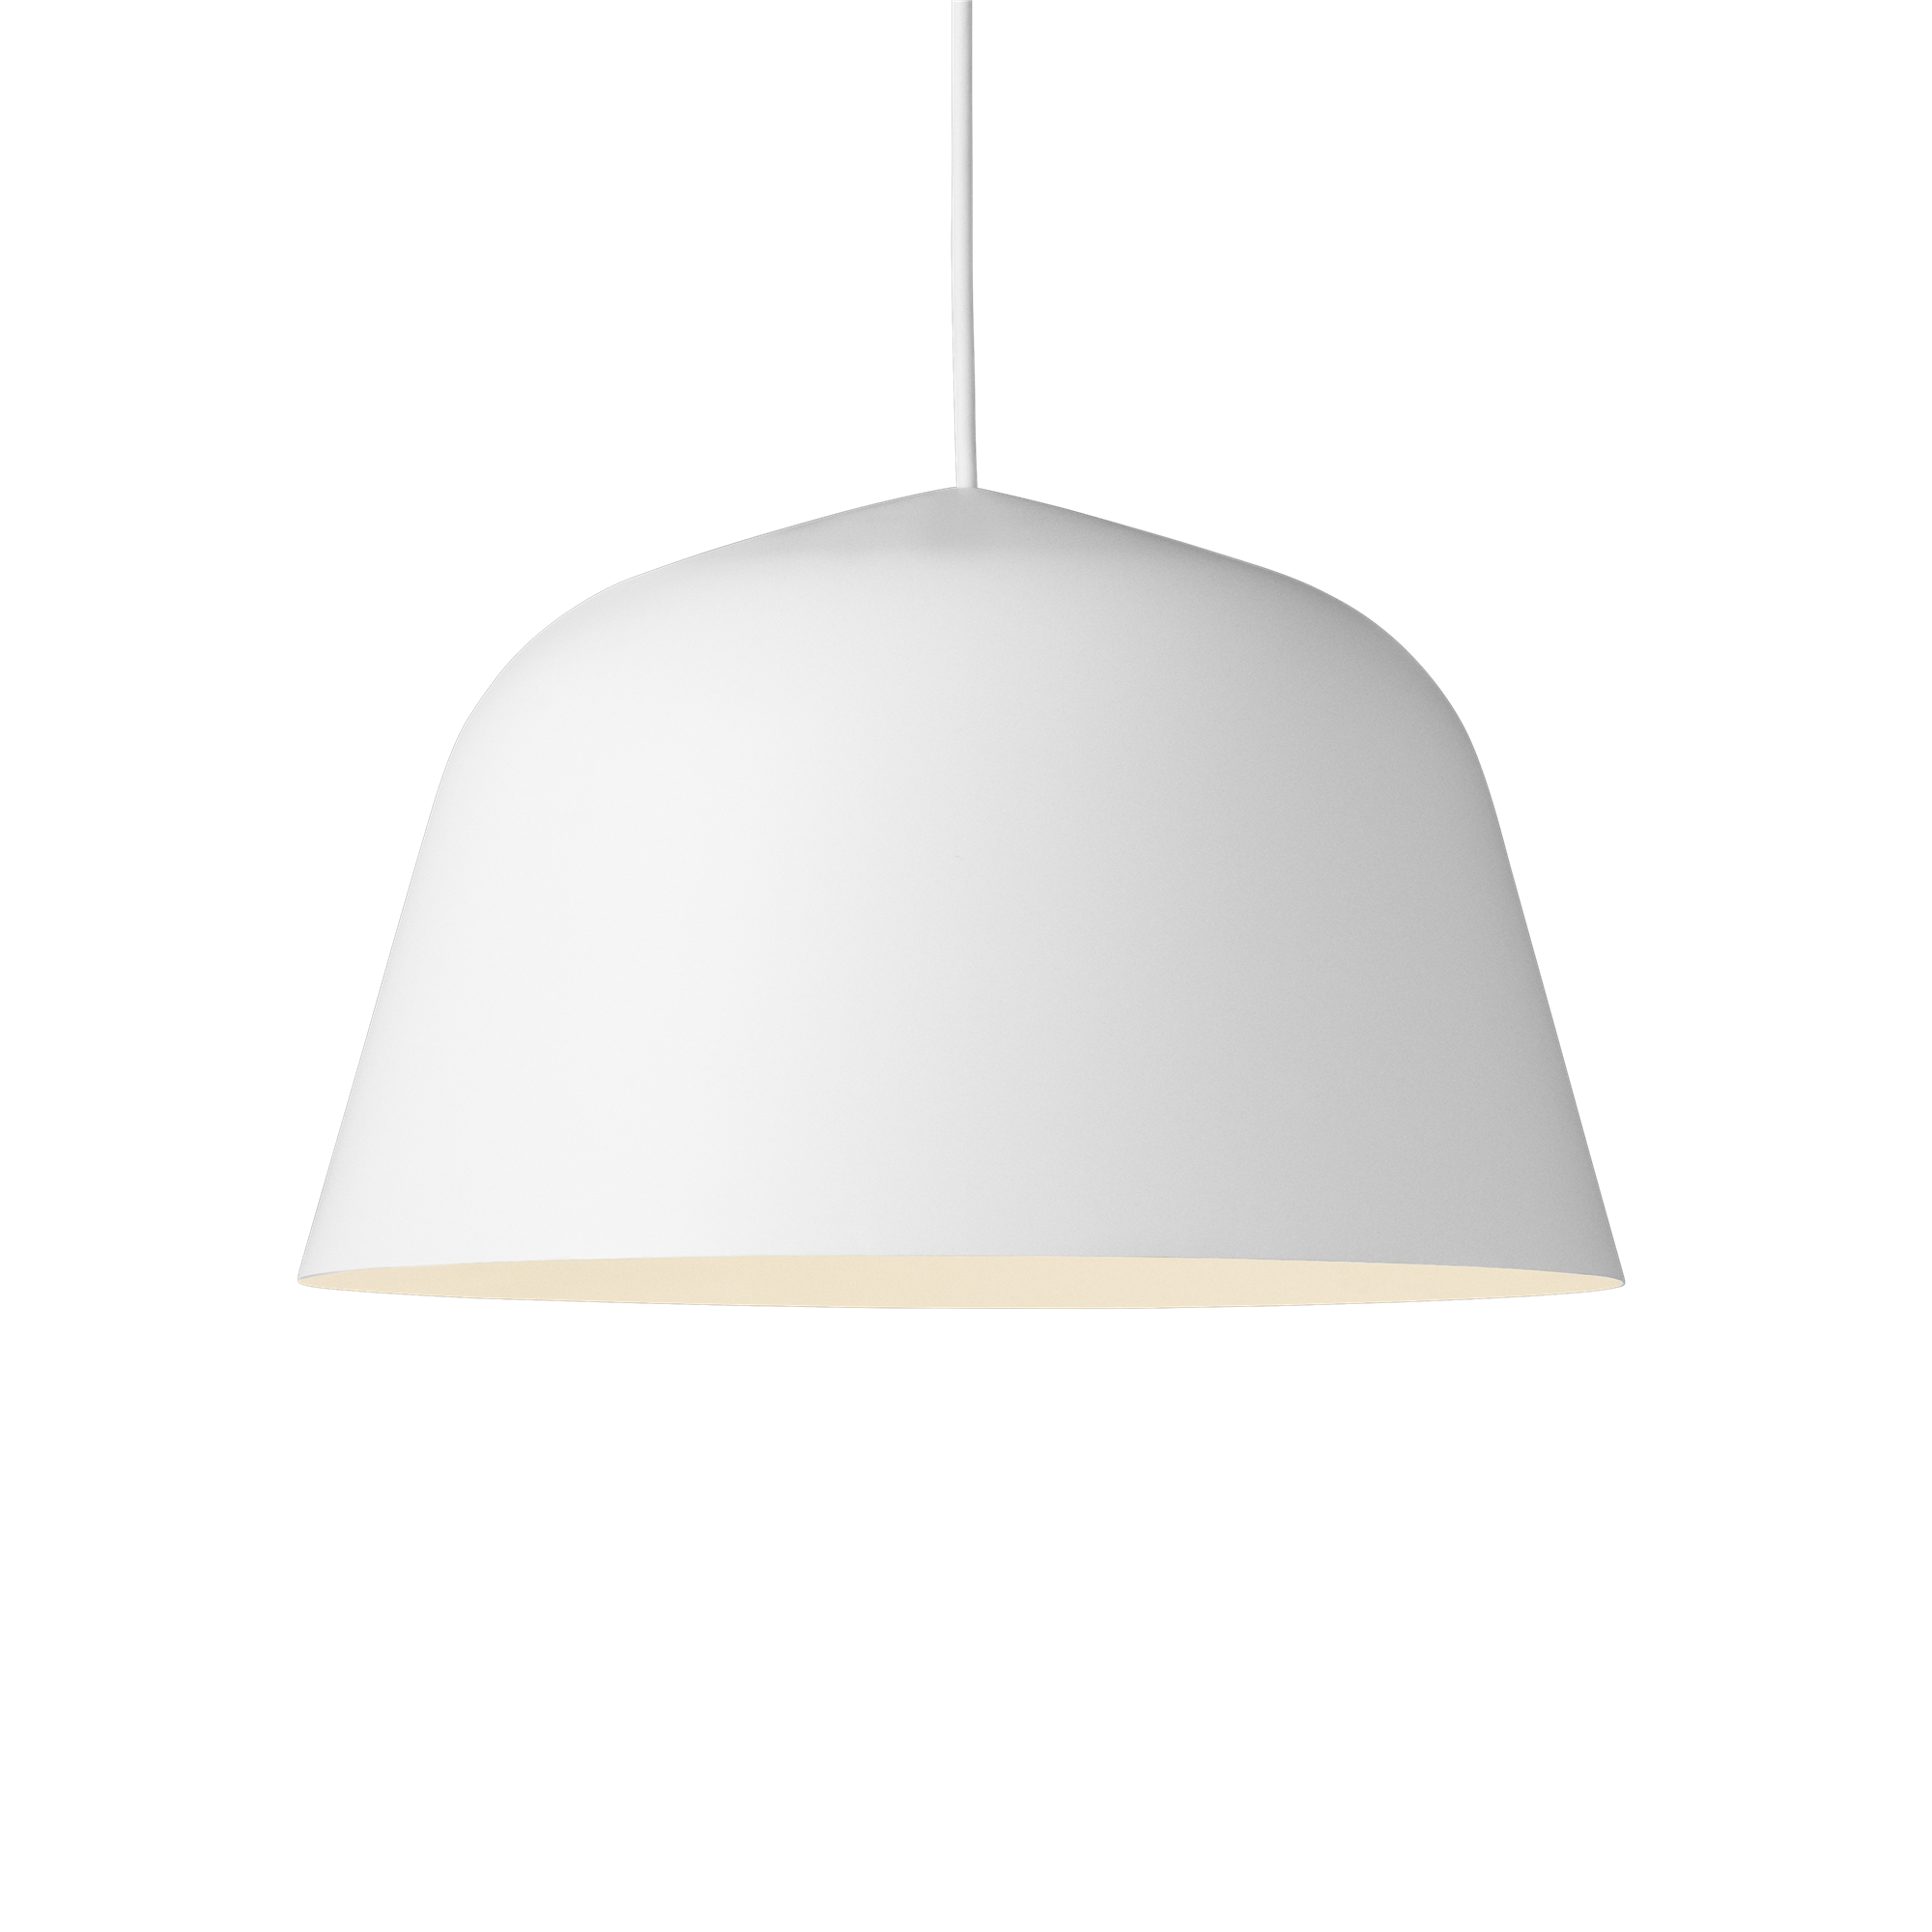 White Ceiling Lamp Free Transparent Image HD PNG Image